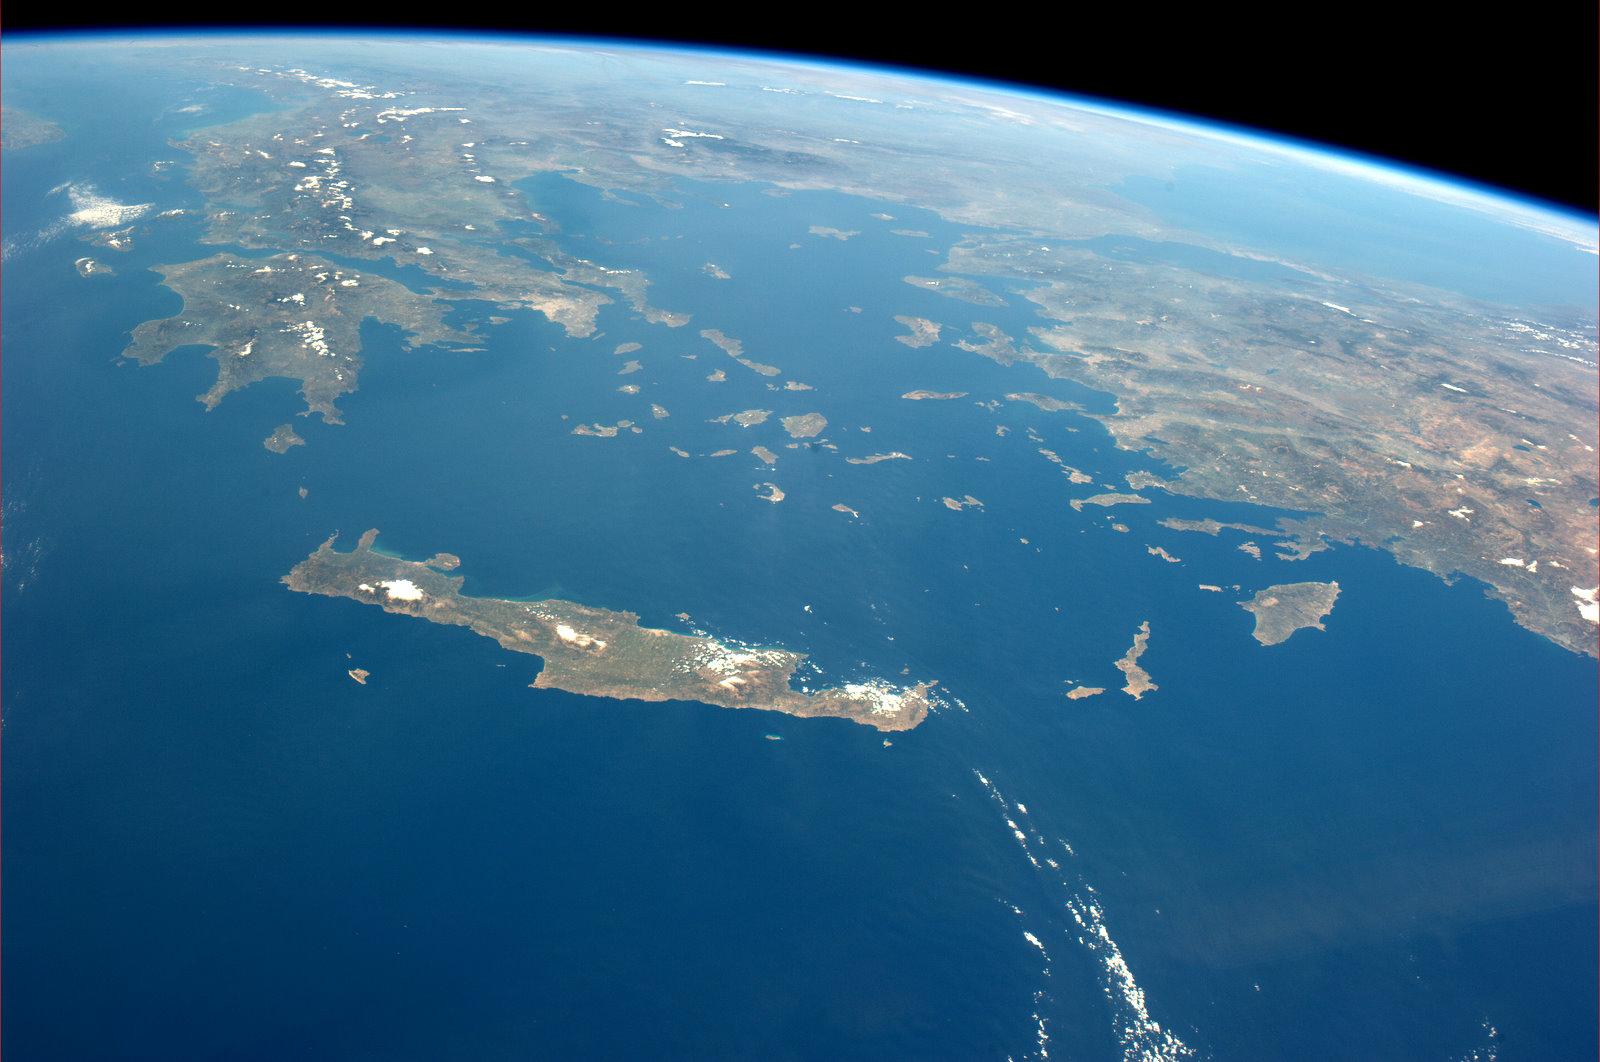 crete from space